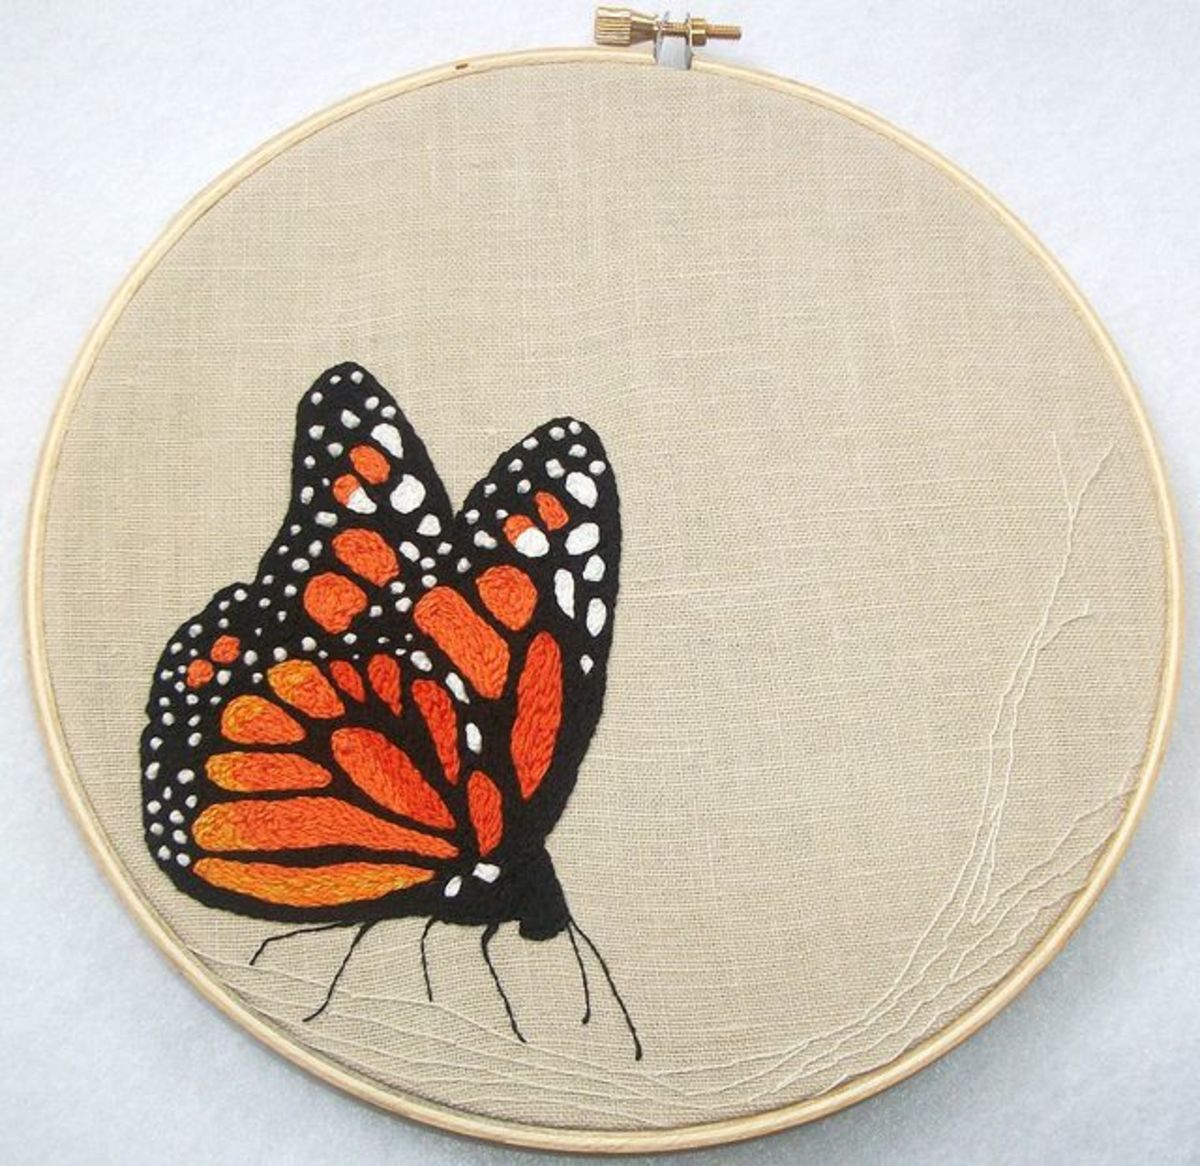 This beautiful butterfly is made up of 'lots of split stitches, some french knots, and a few back stitches' on reclaimed linen.